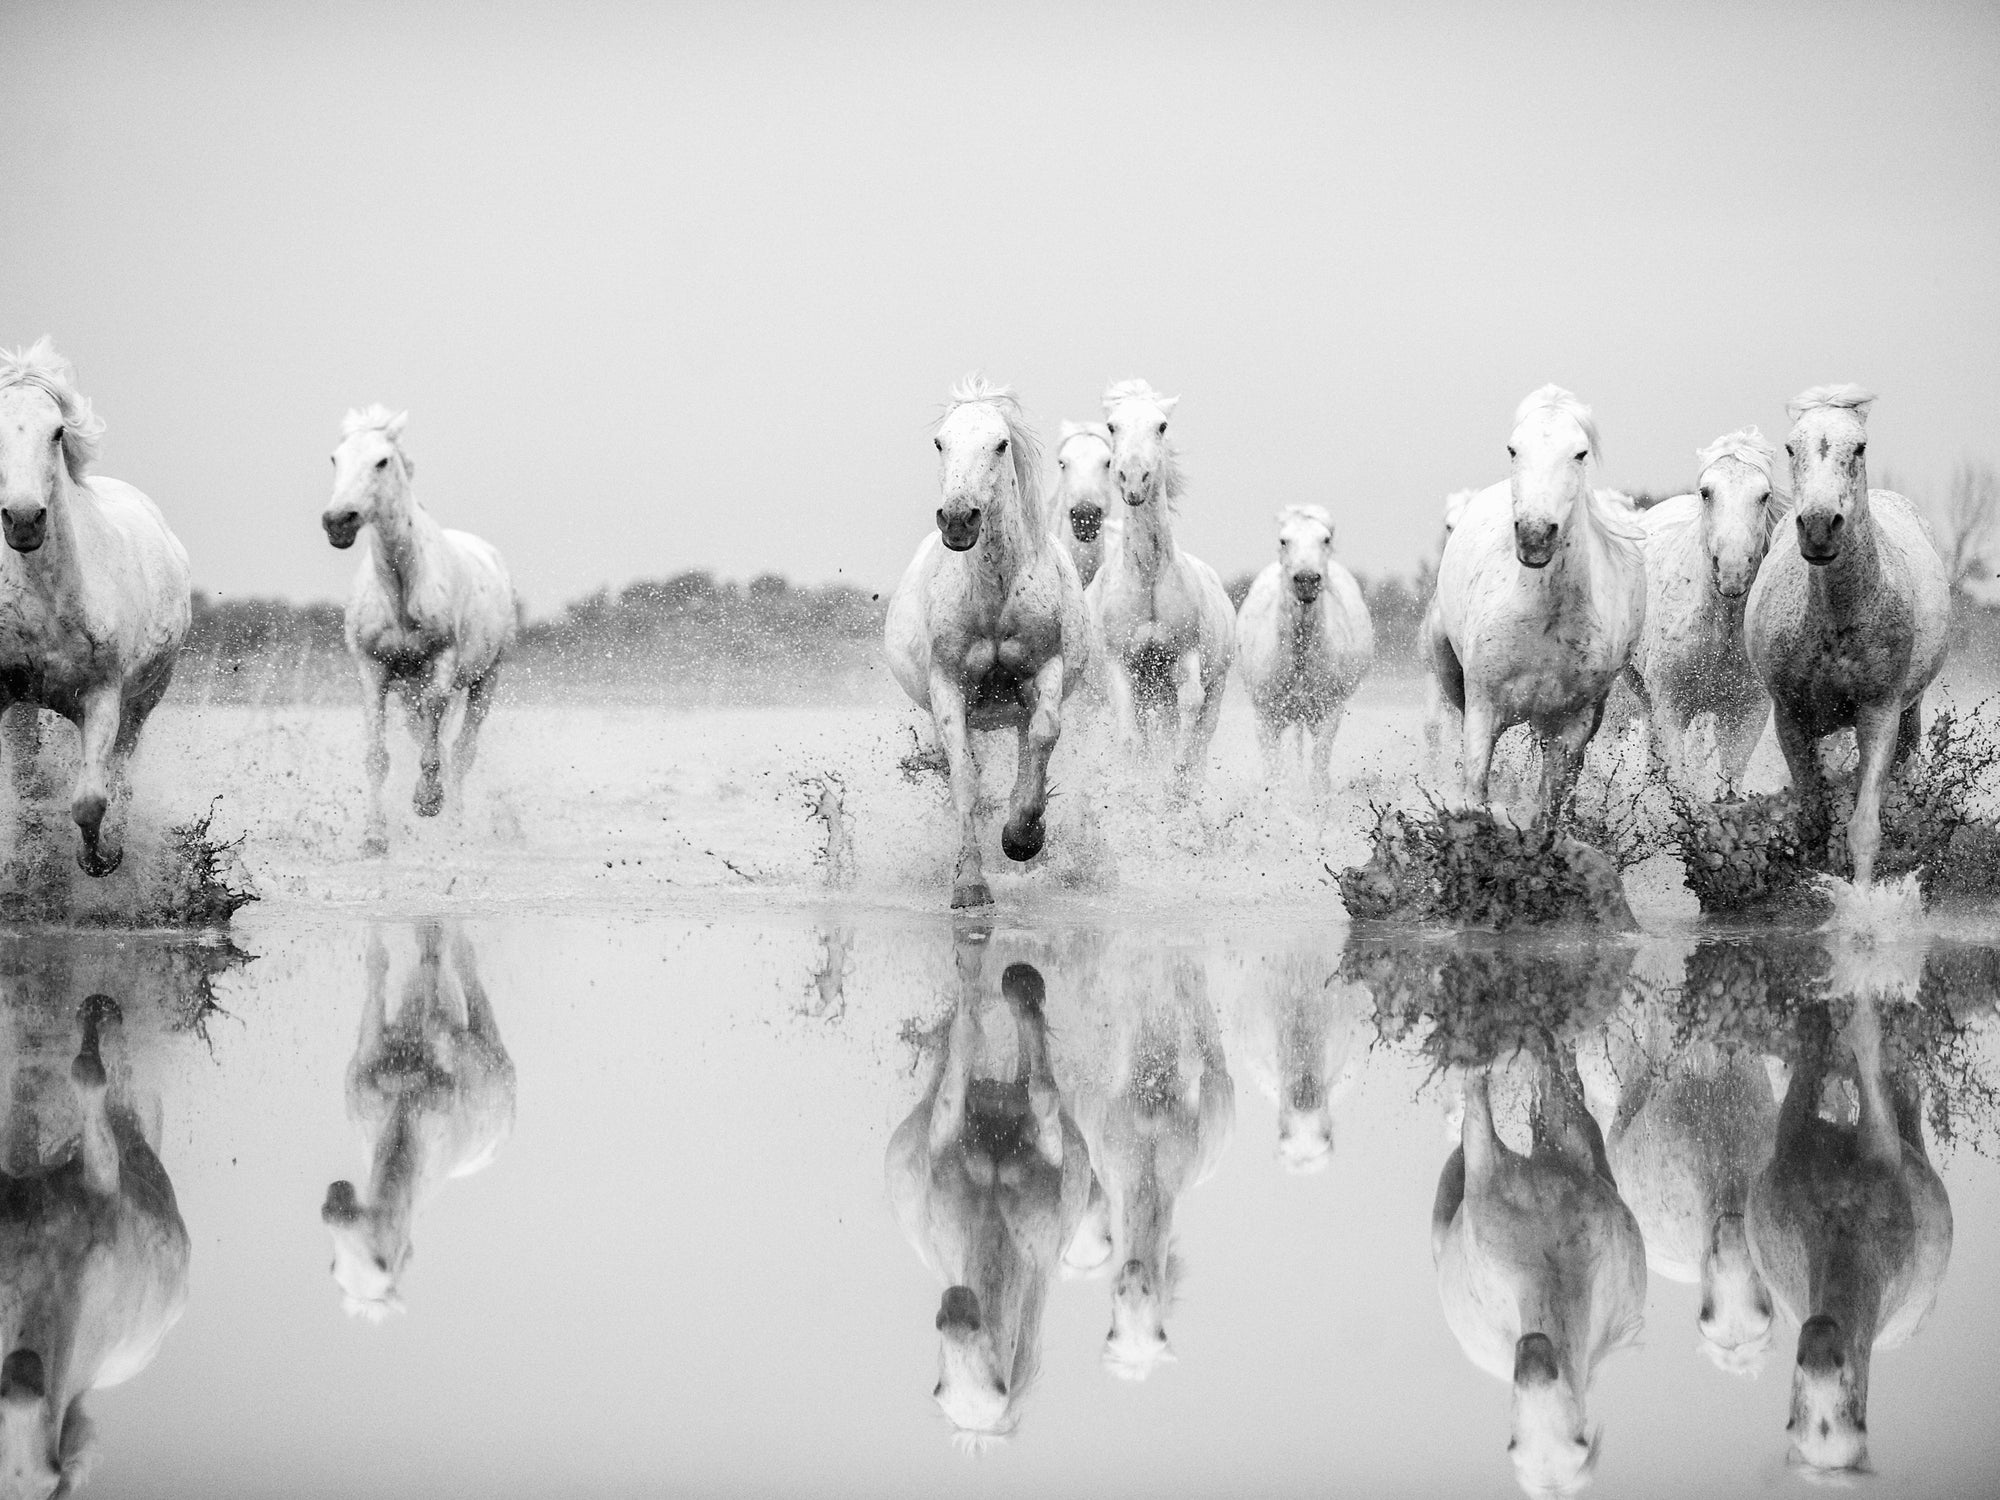 "Horses in full stride, charging through the water with fierce determination, captured in striking black and white."